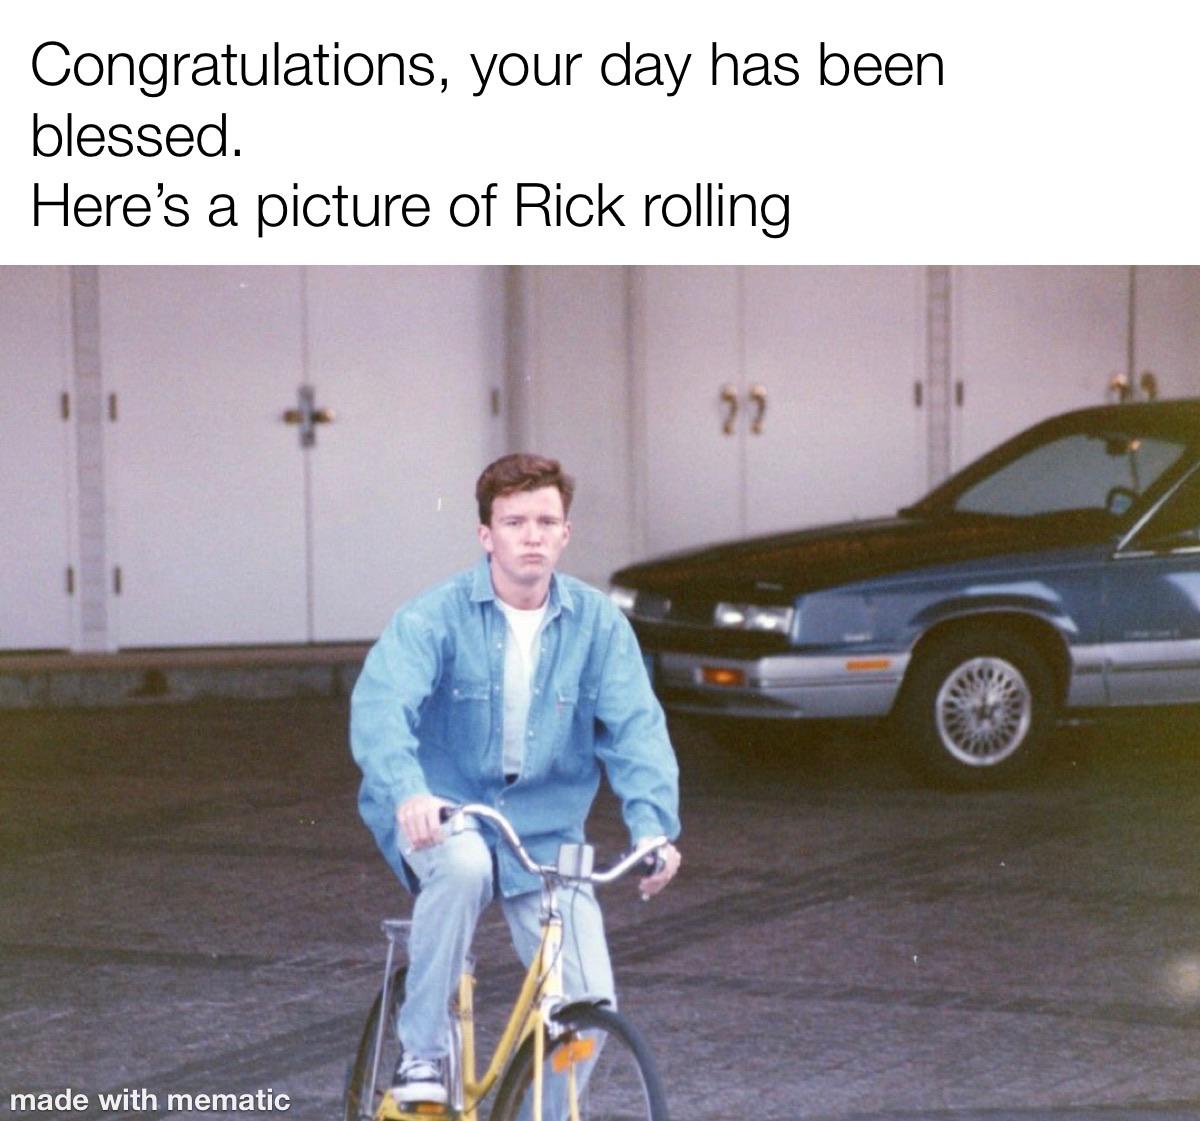 dank memes - rick astley riding bike - Congratulations, your day has been blessed. Here's a picture of Rick rolling 22 made with mematic